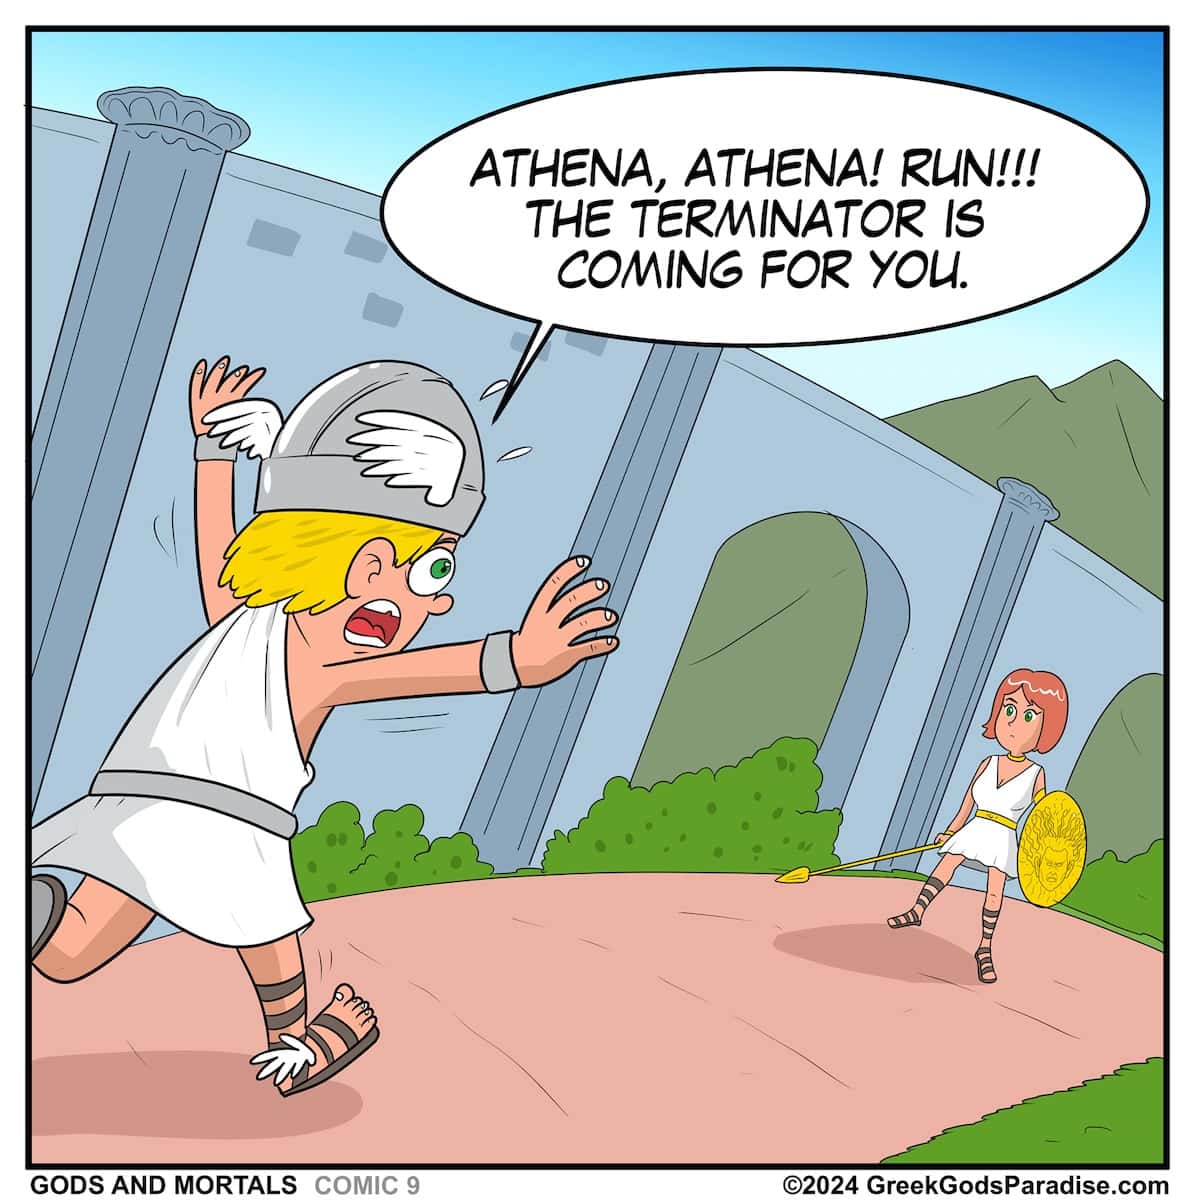 Greek God Hermes rushes to Athena to alert her that the Terminator is after her